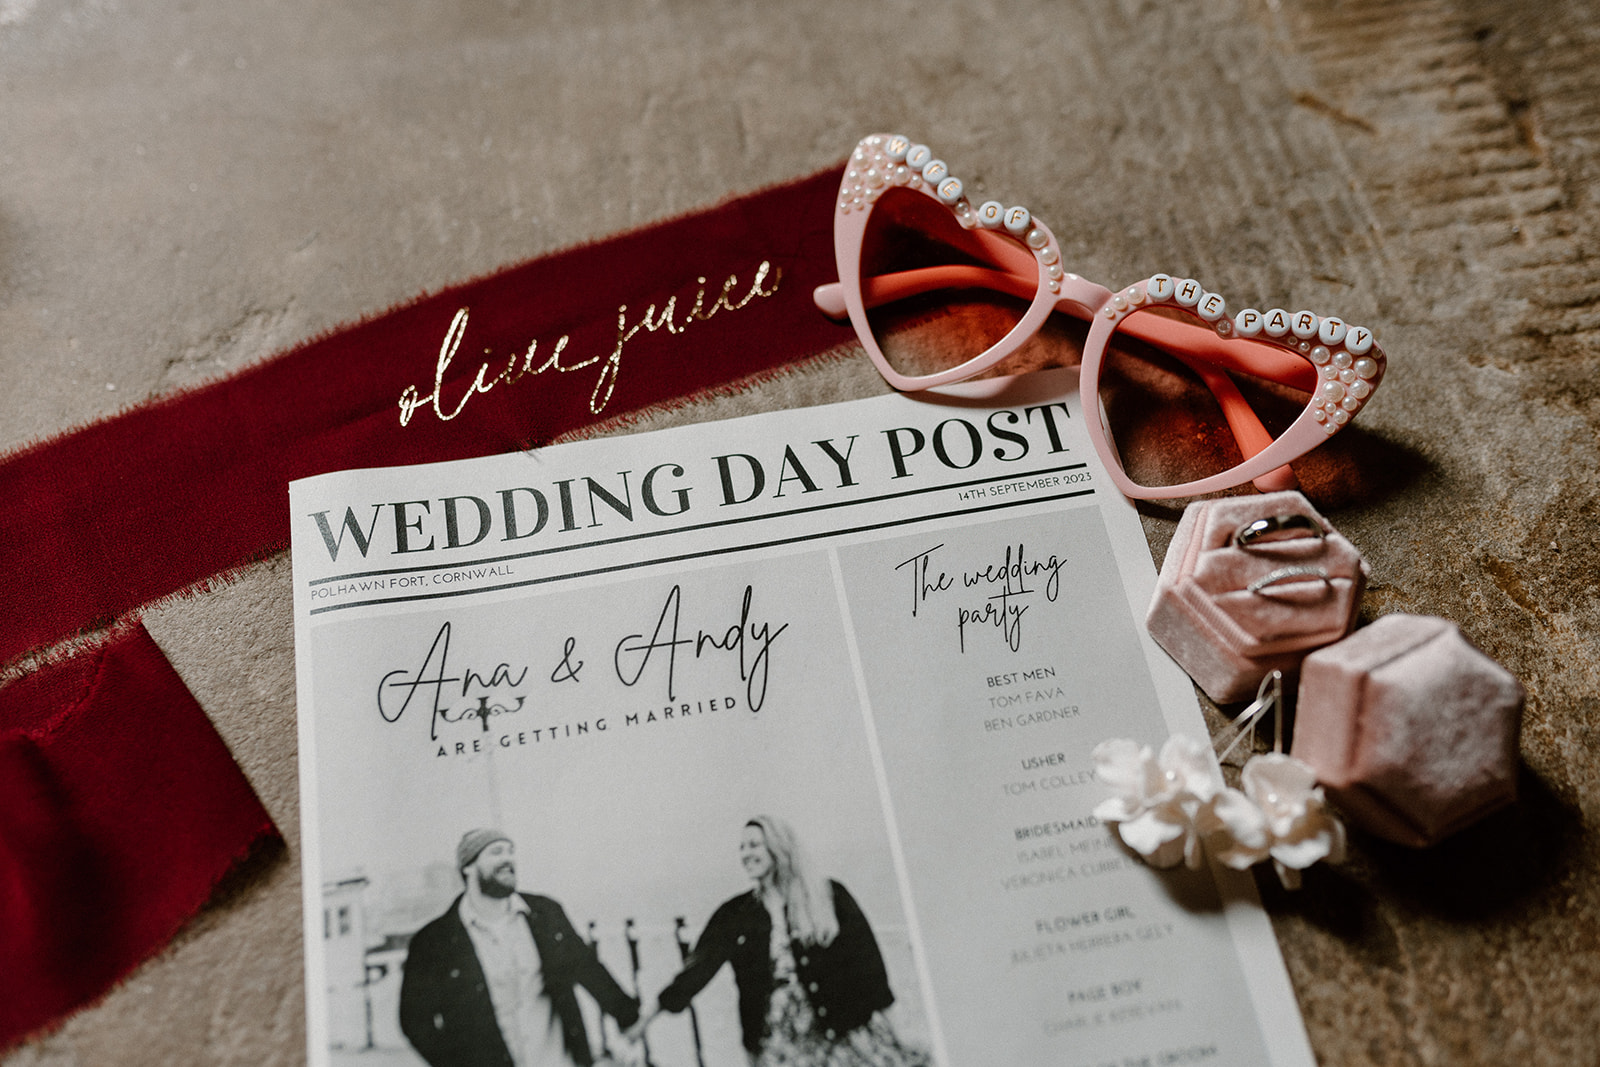 Flat lay of bridal details including wedding day newspaper, sunglasses, rings and ribbon